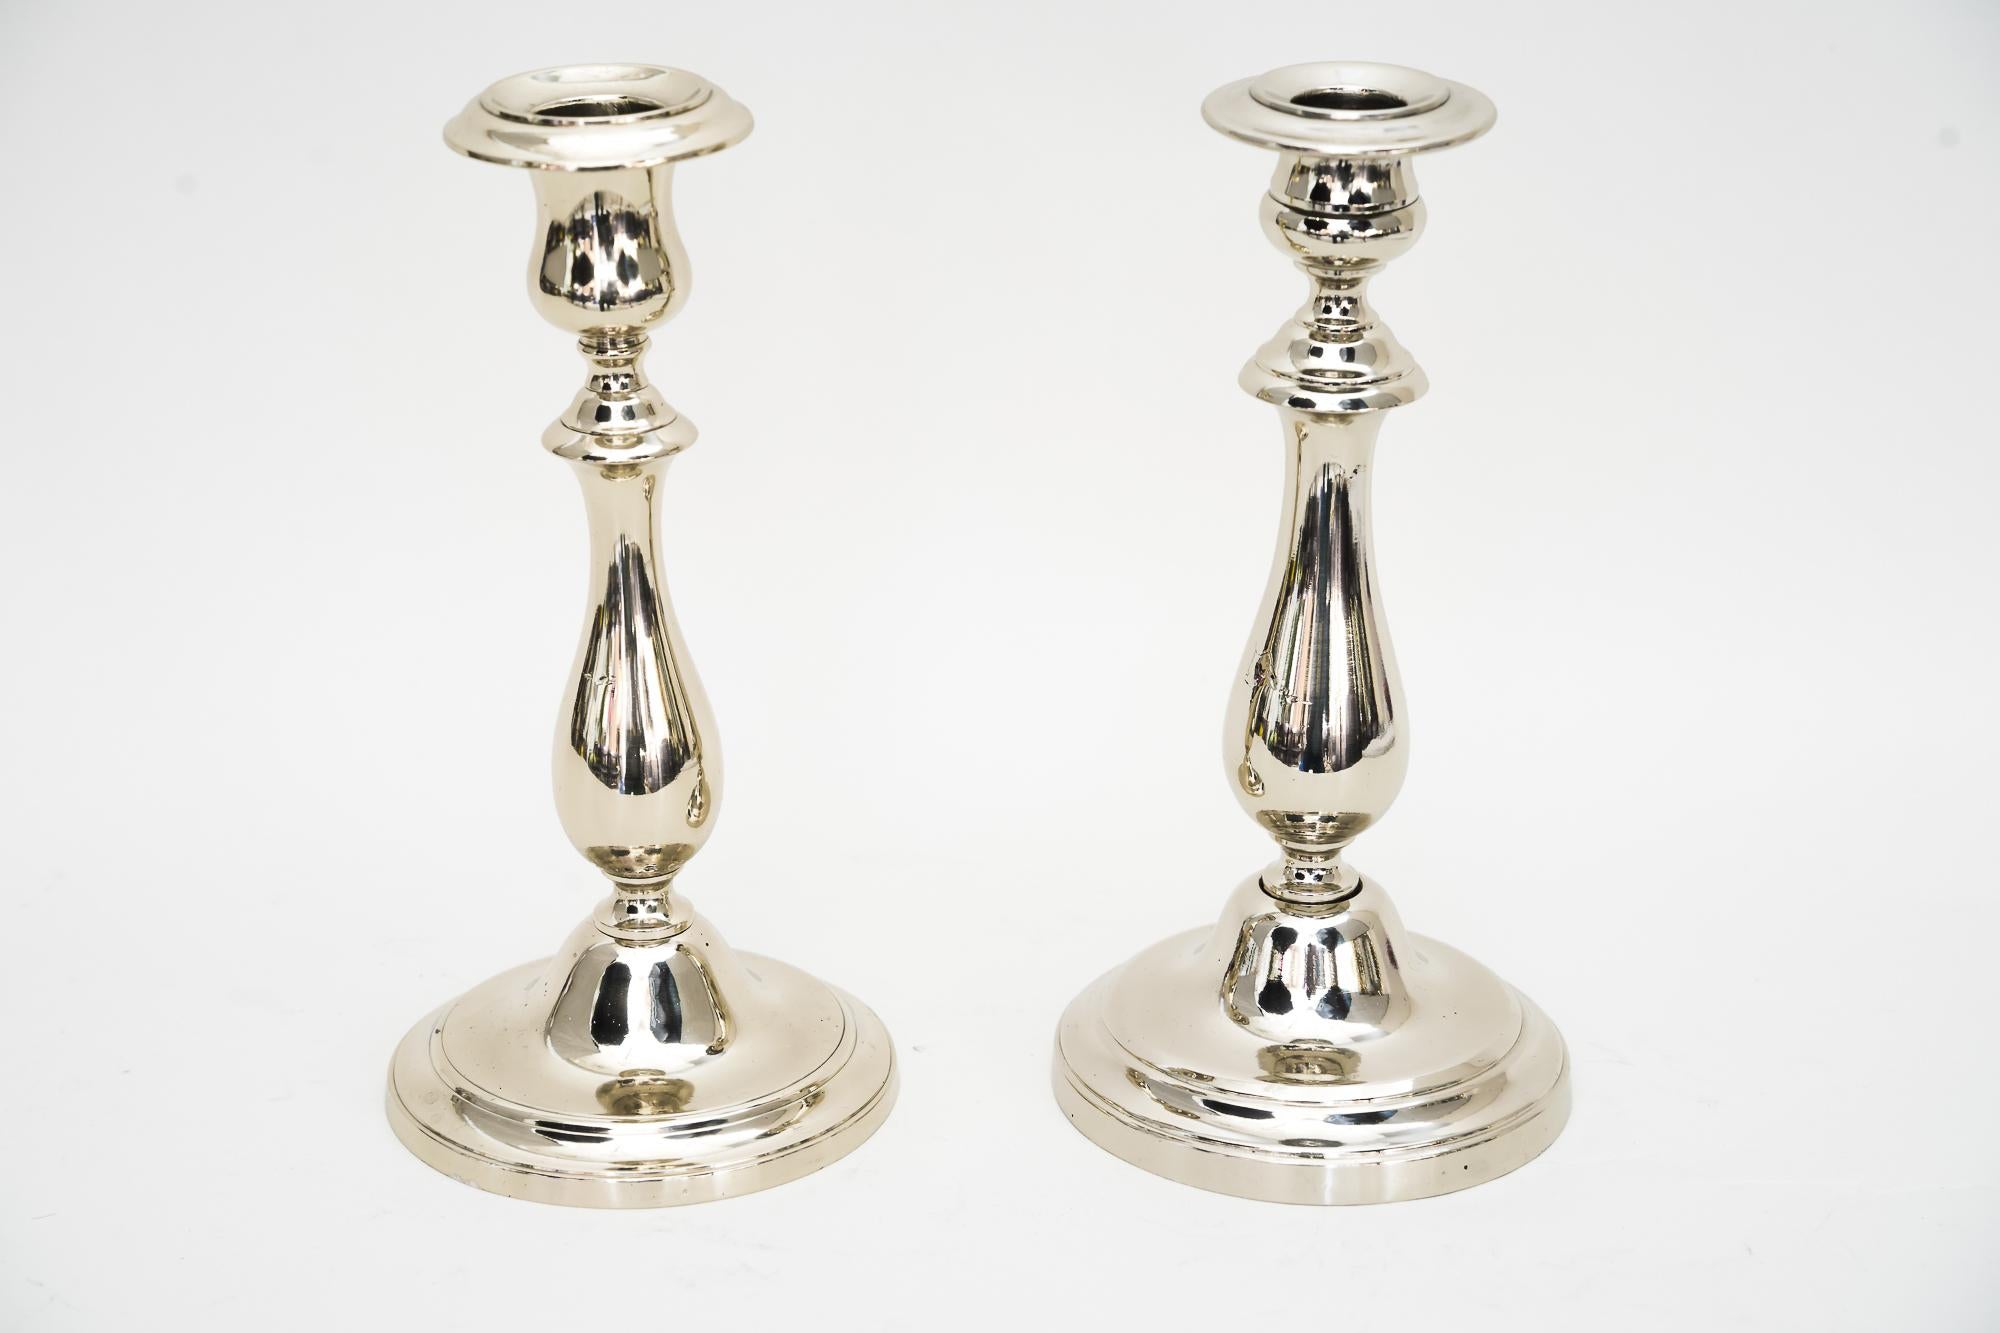 2 Candle holders made of alpaca ( white metal ) around 1920s
Polished.